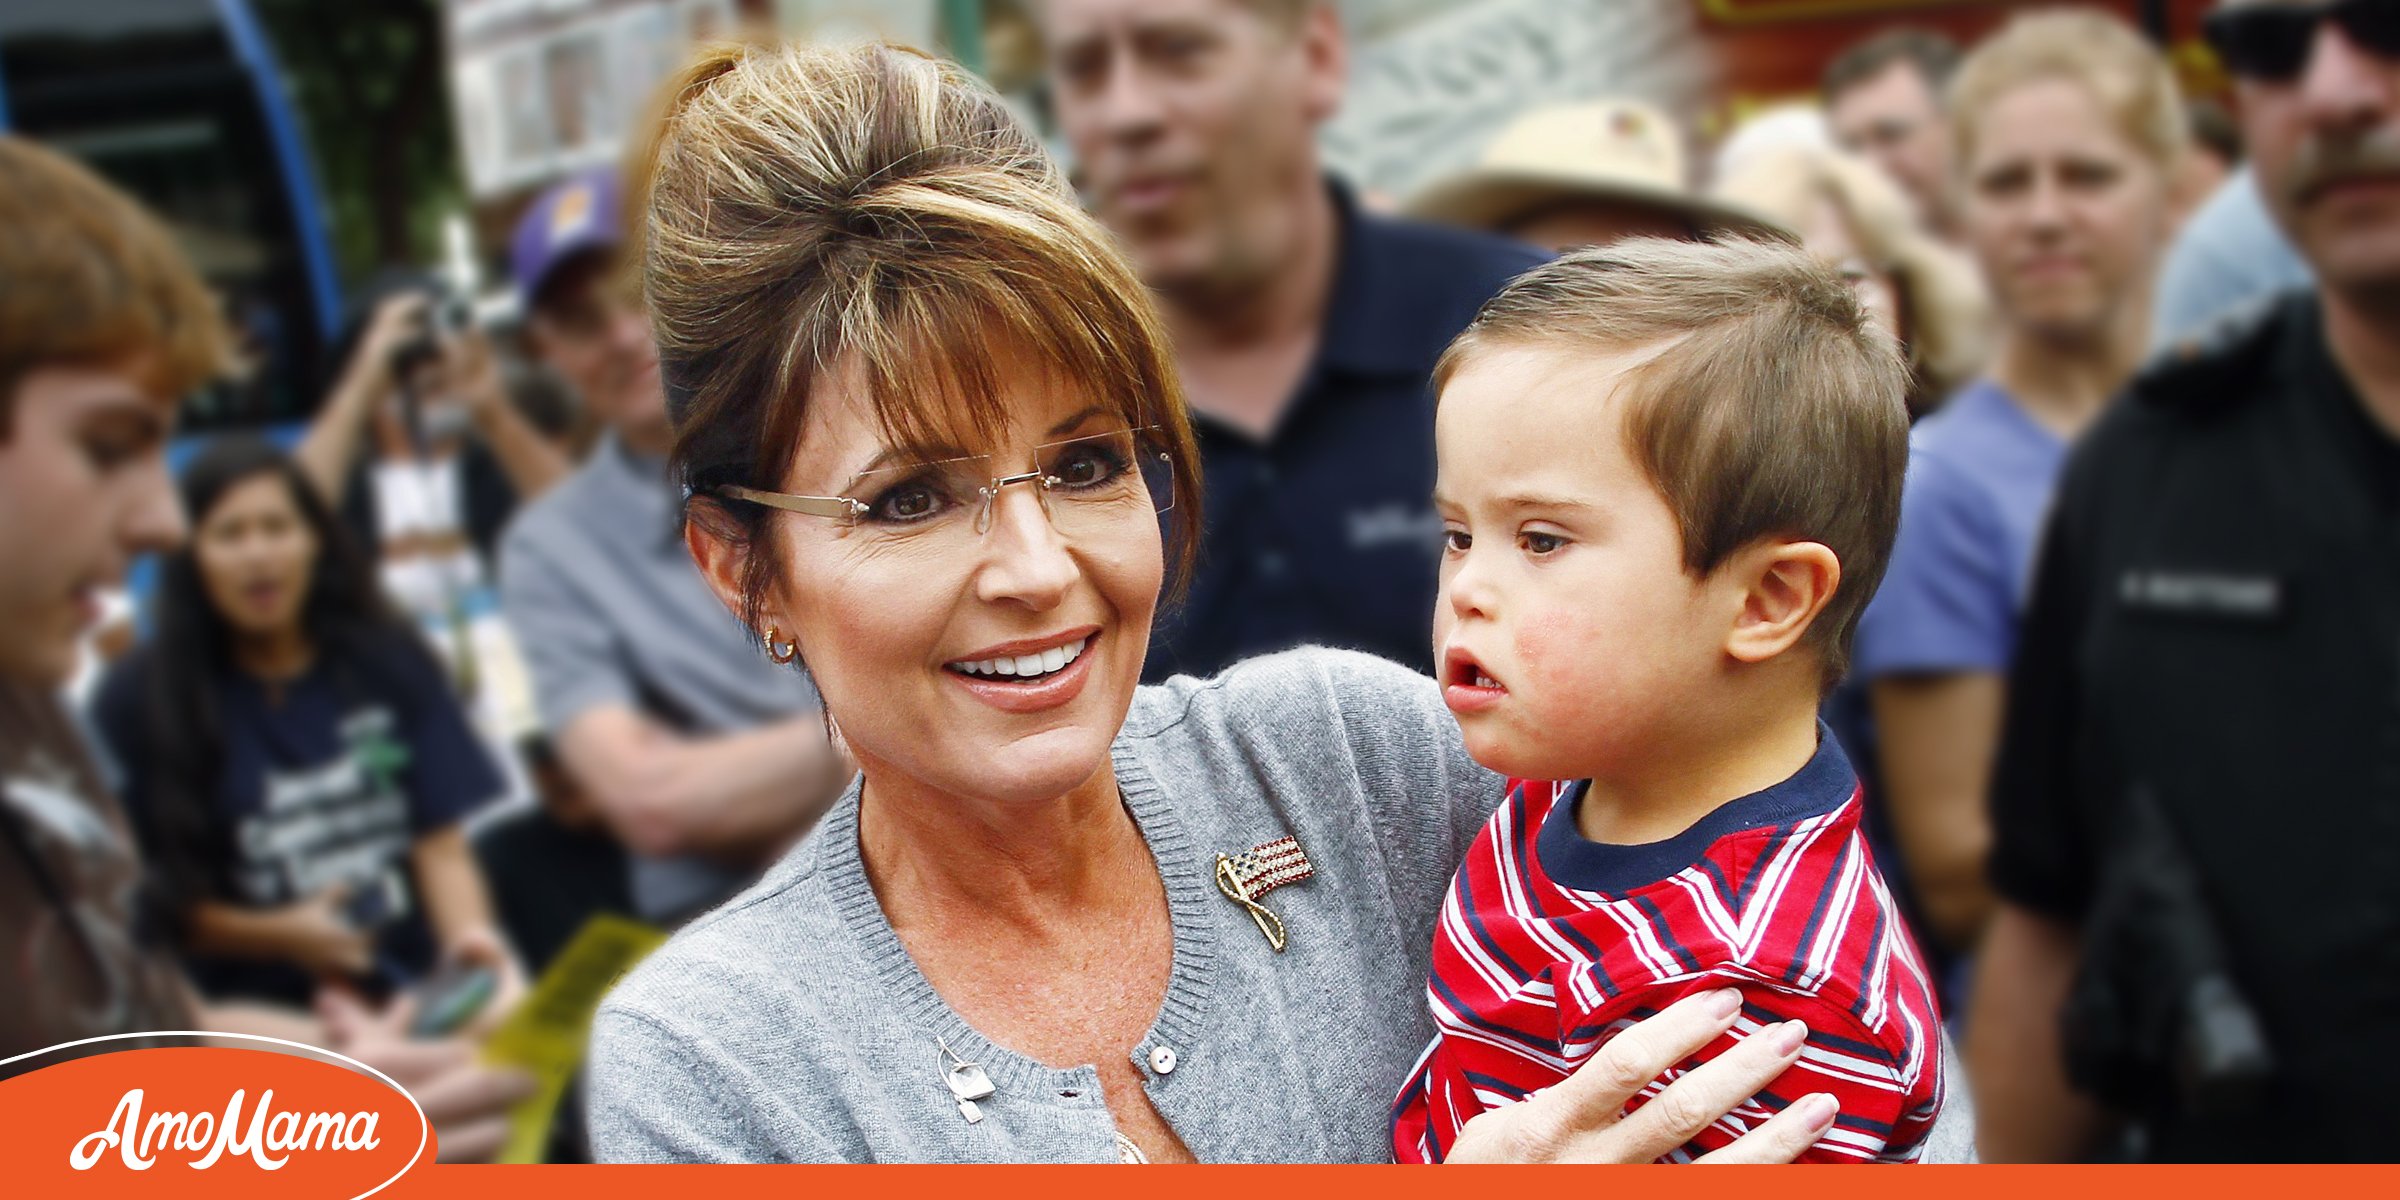 Trig Palin Is Already a Teenager All We Know about Sarah Palin's Son